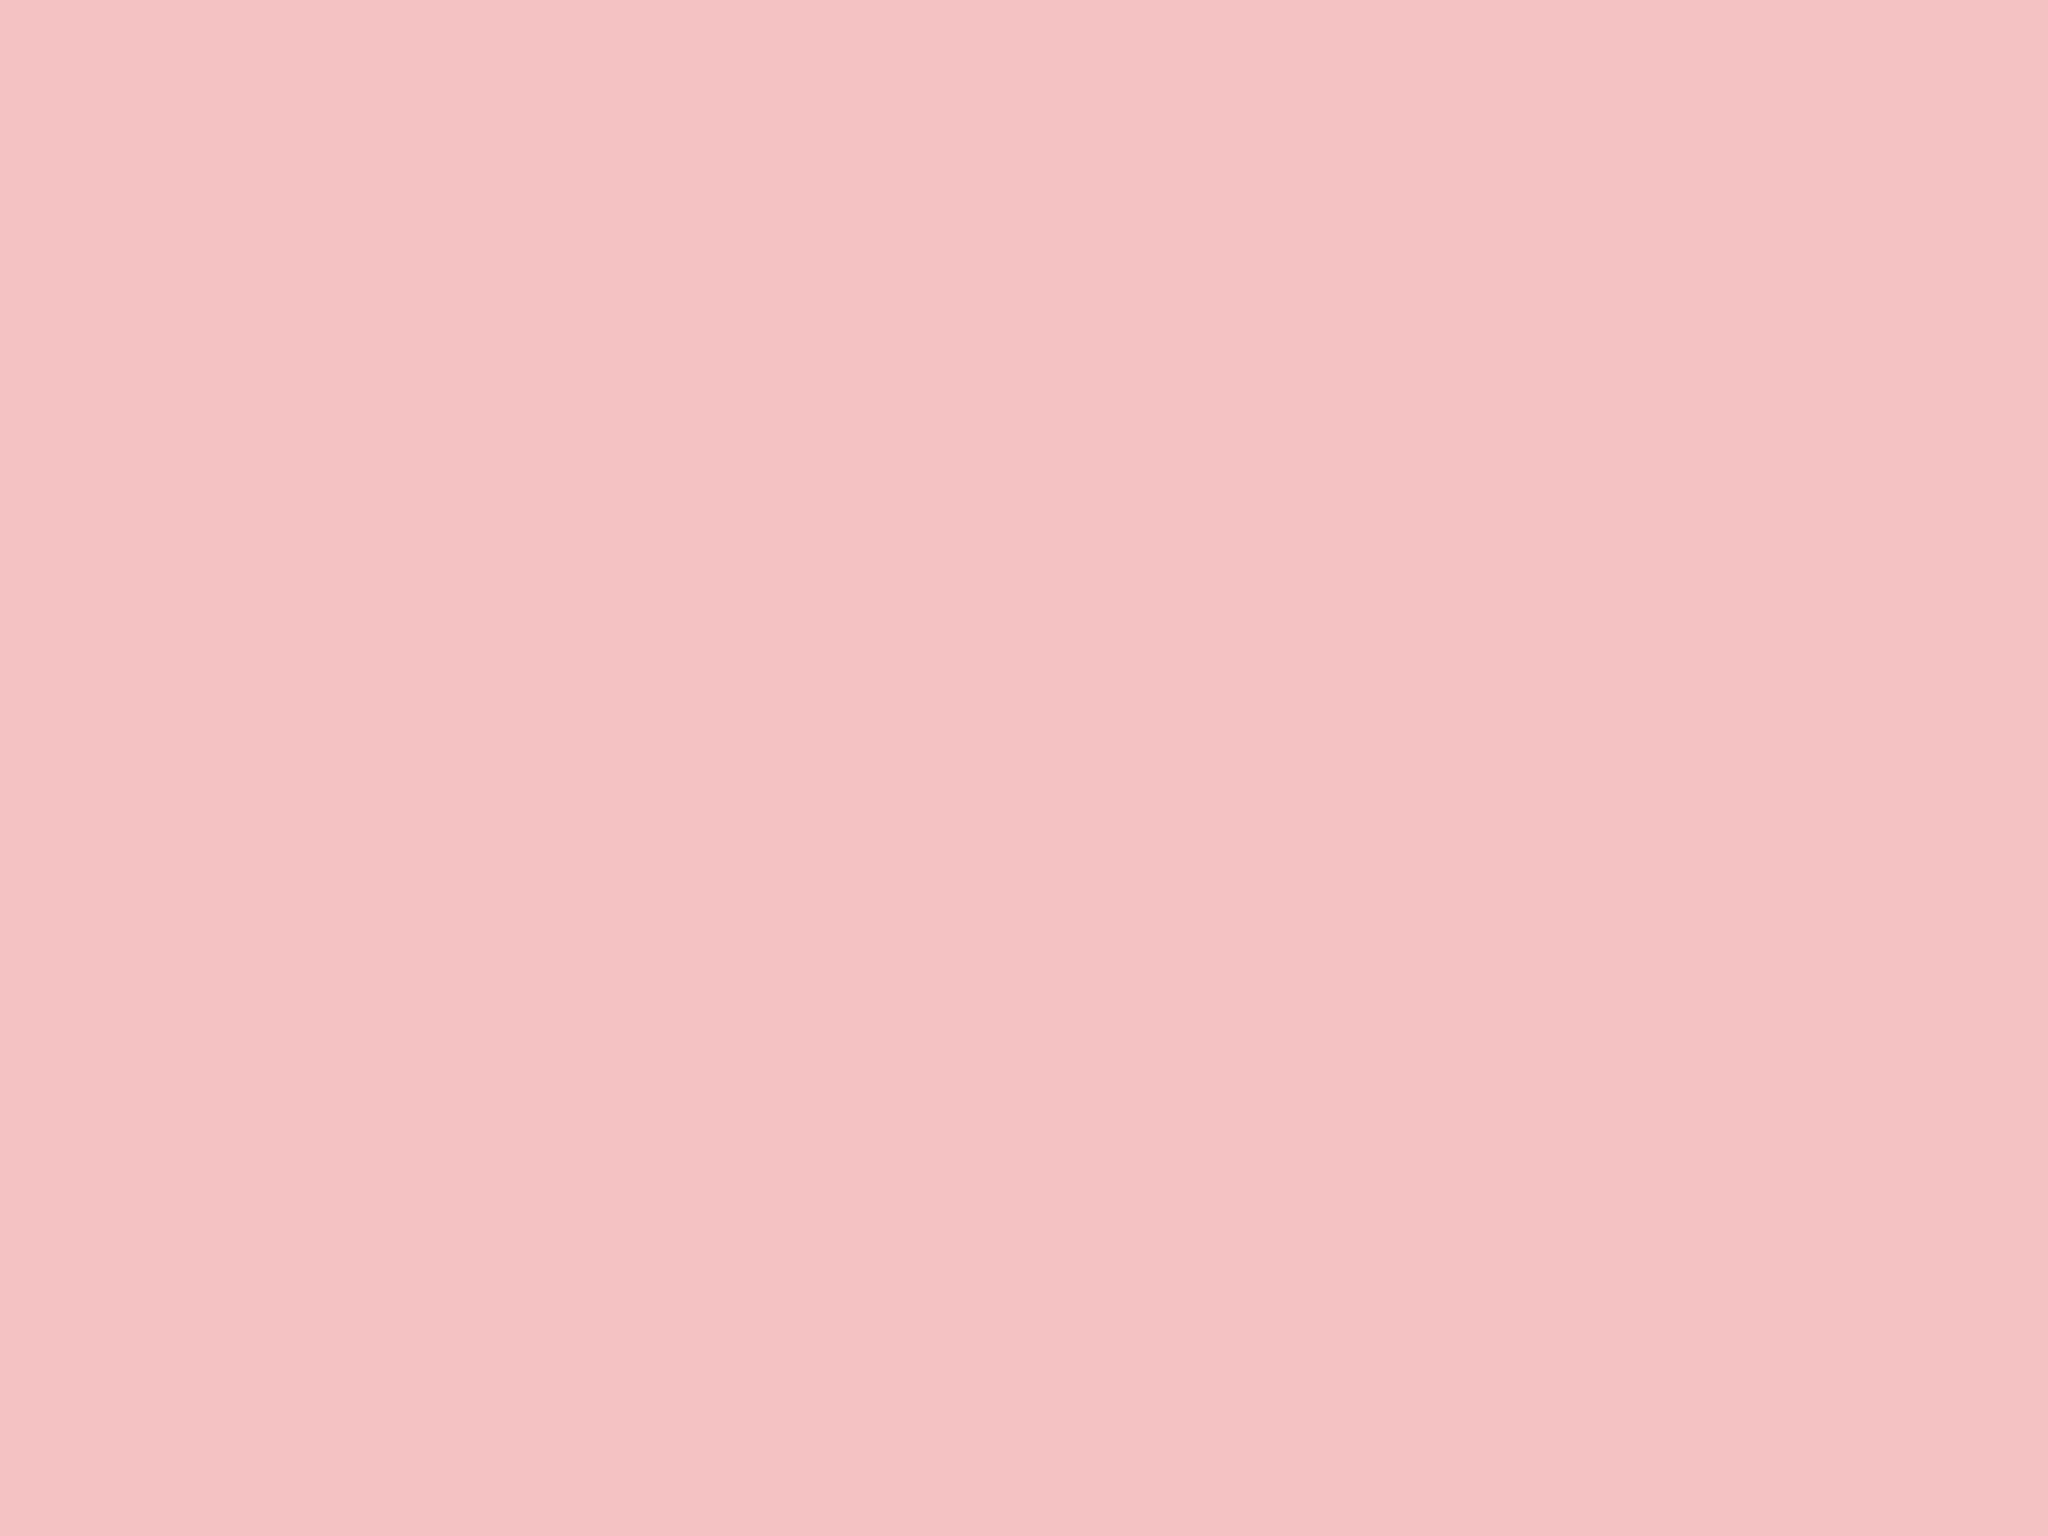 Free 2048x1536 resolution Baby Pink solid color background view and